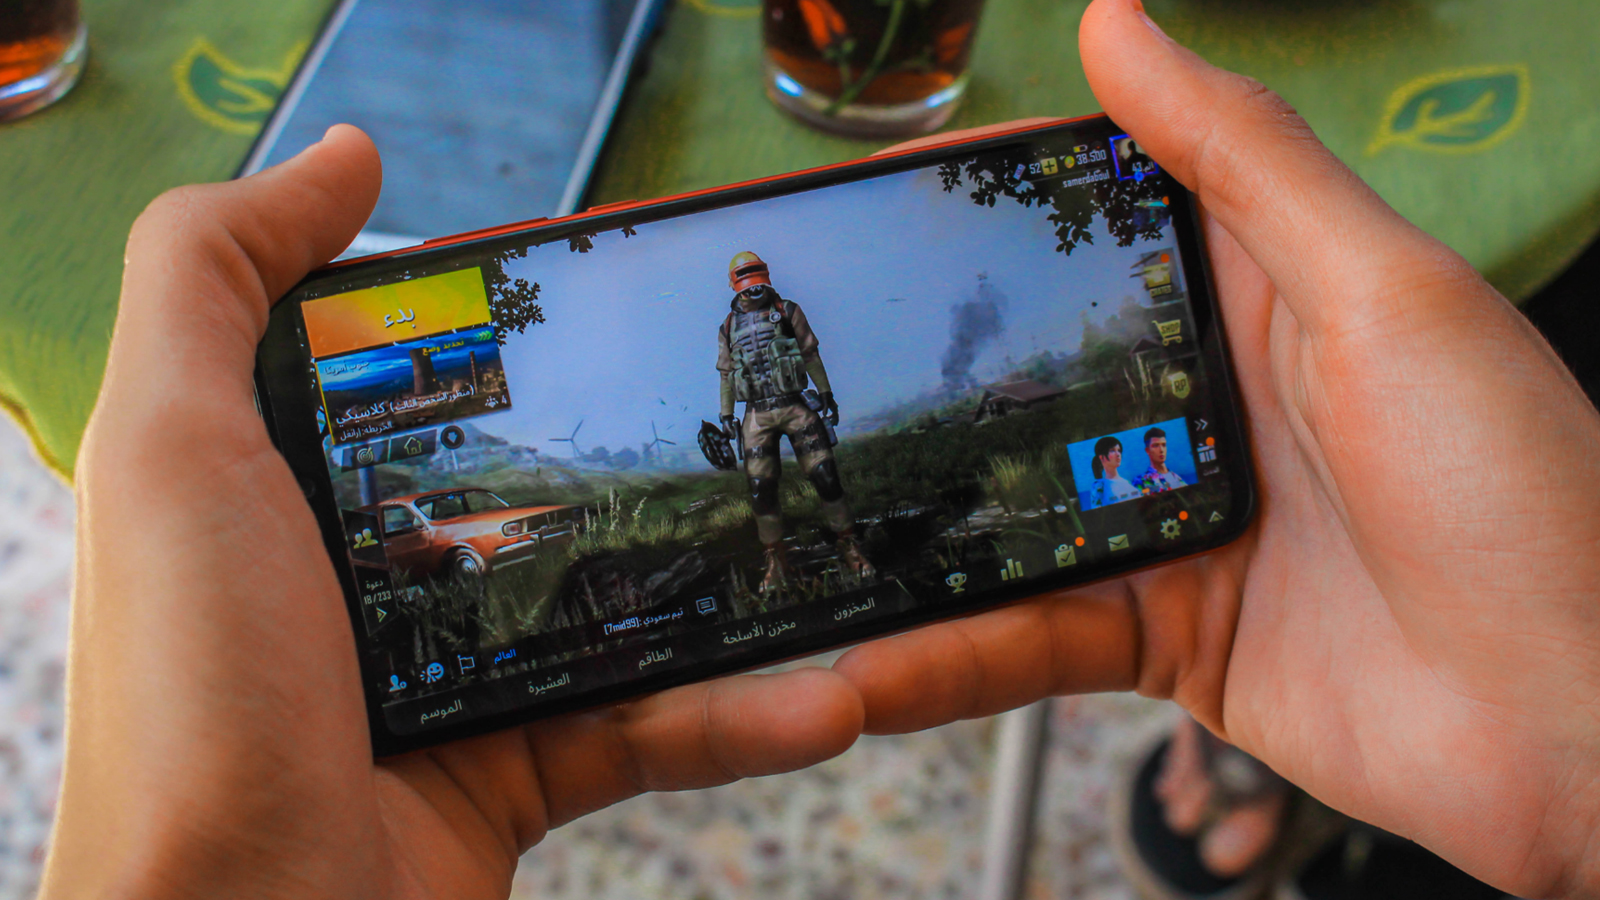 How to stream iOS games from your iPad and iPhone